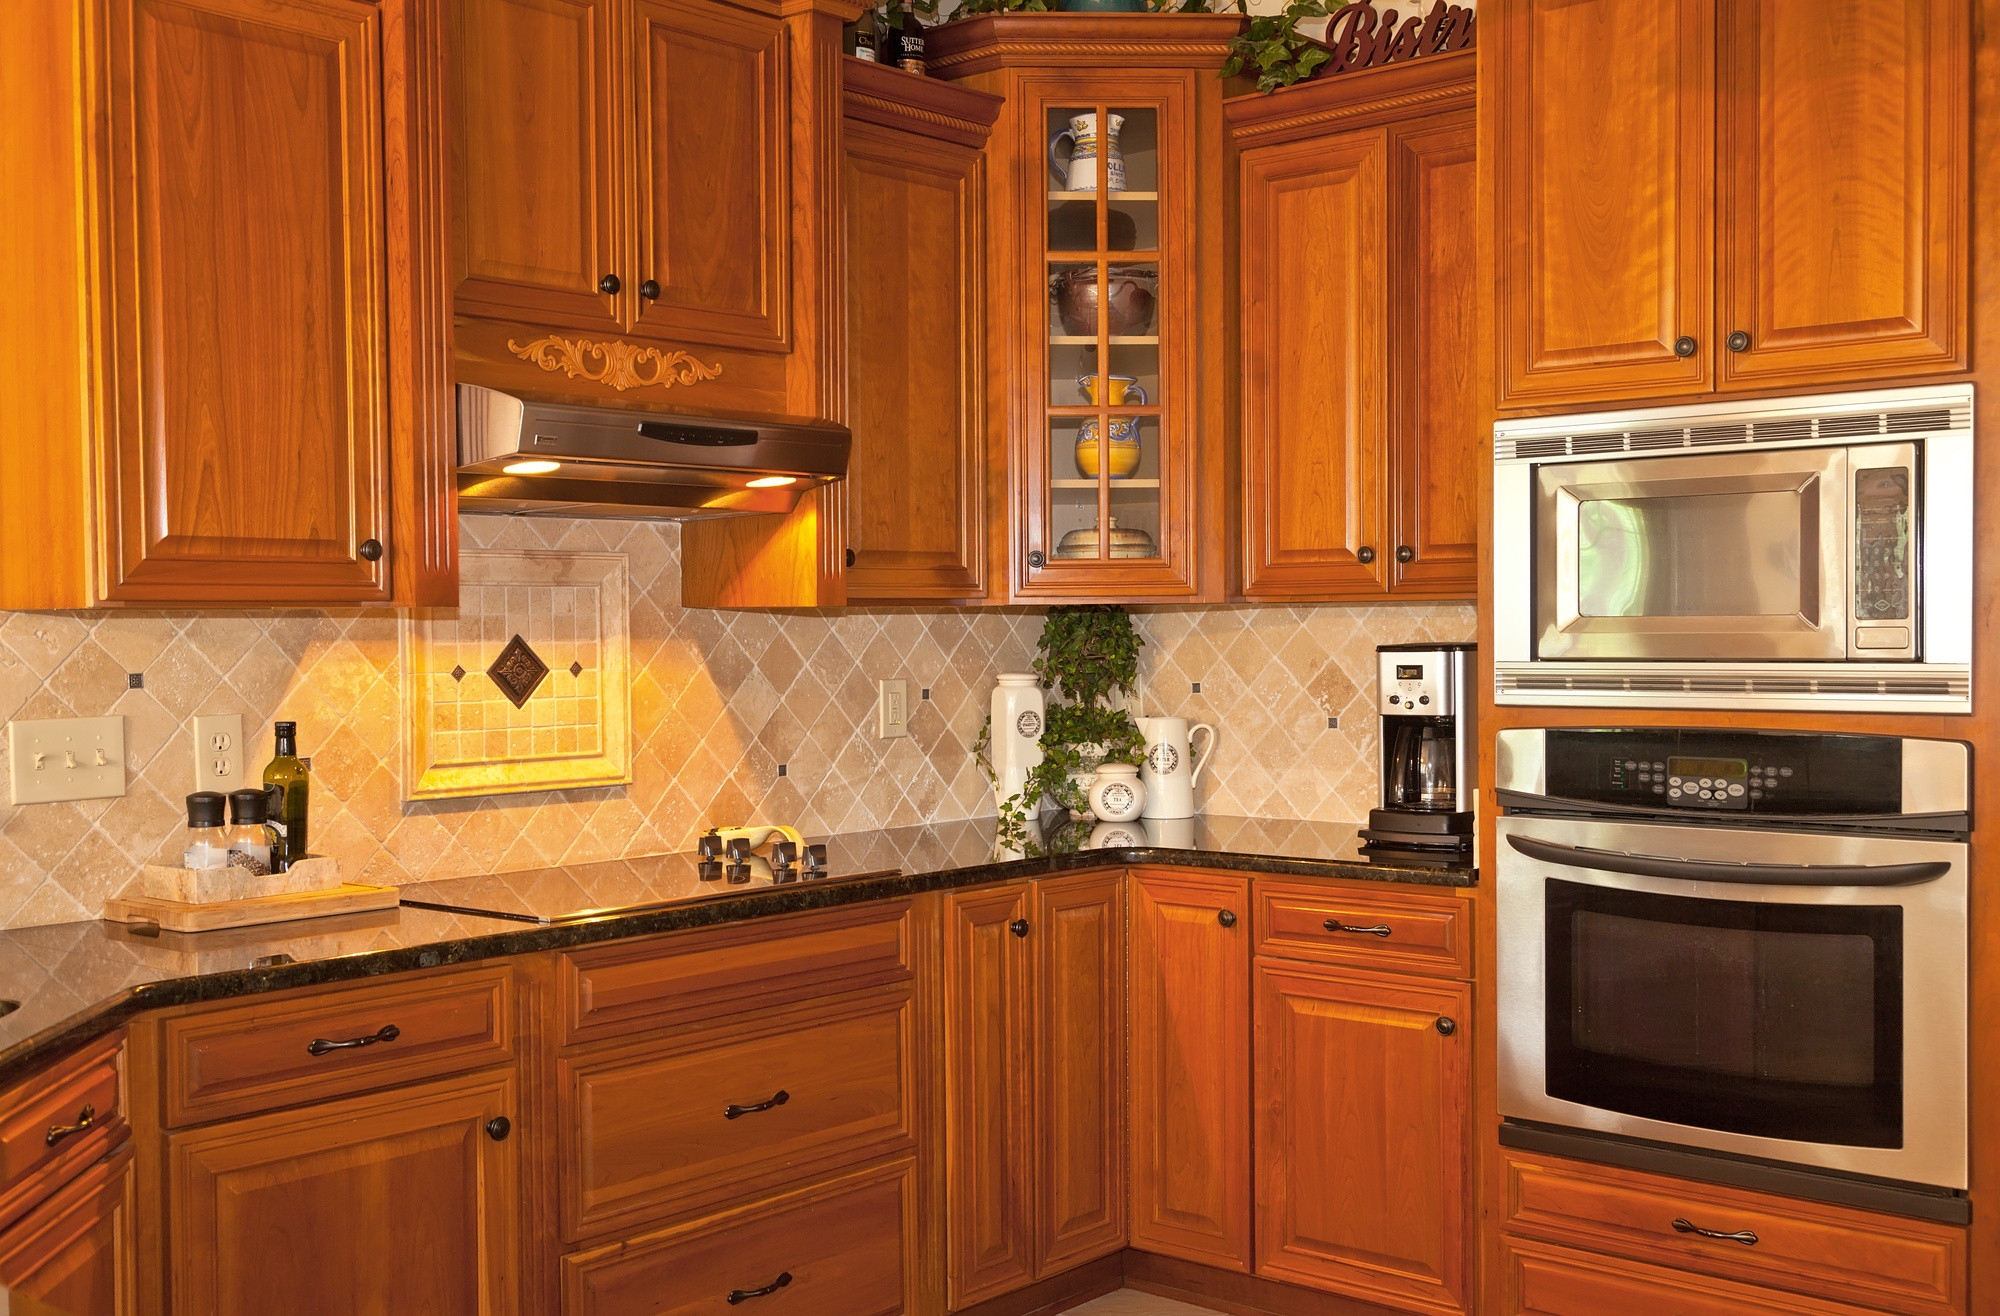 Kitchen Wall Cabinet Size
 Kitchen Cabinet Dimensions Your Guide to the Standard Sizes